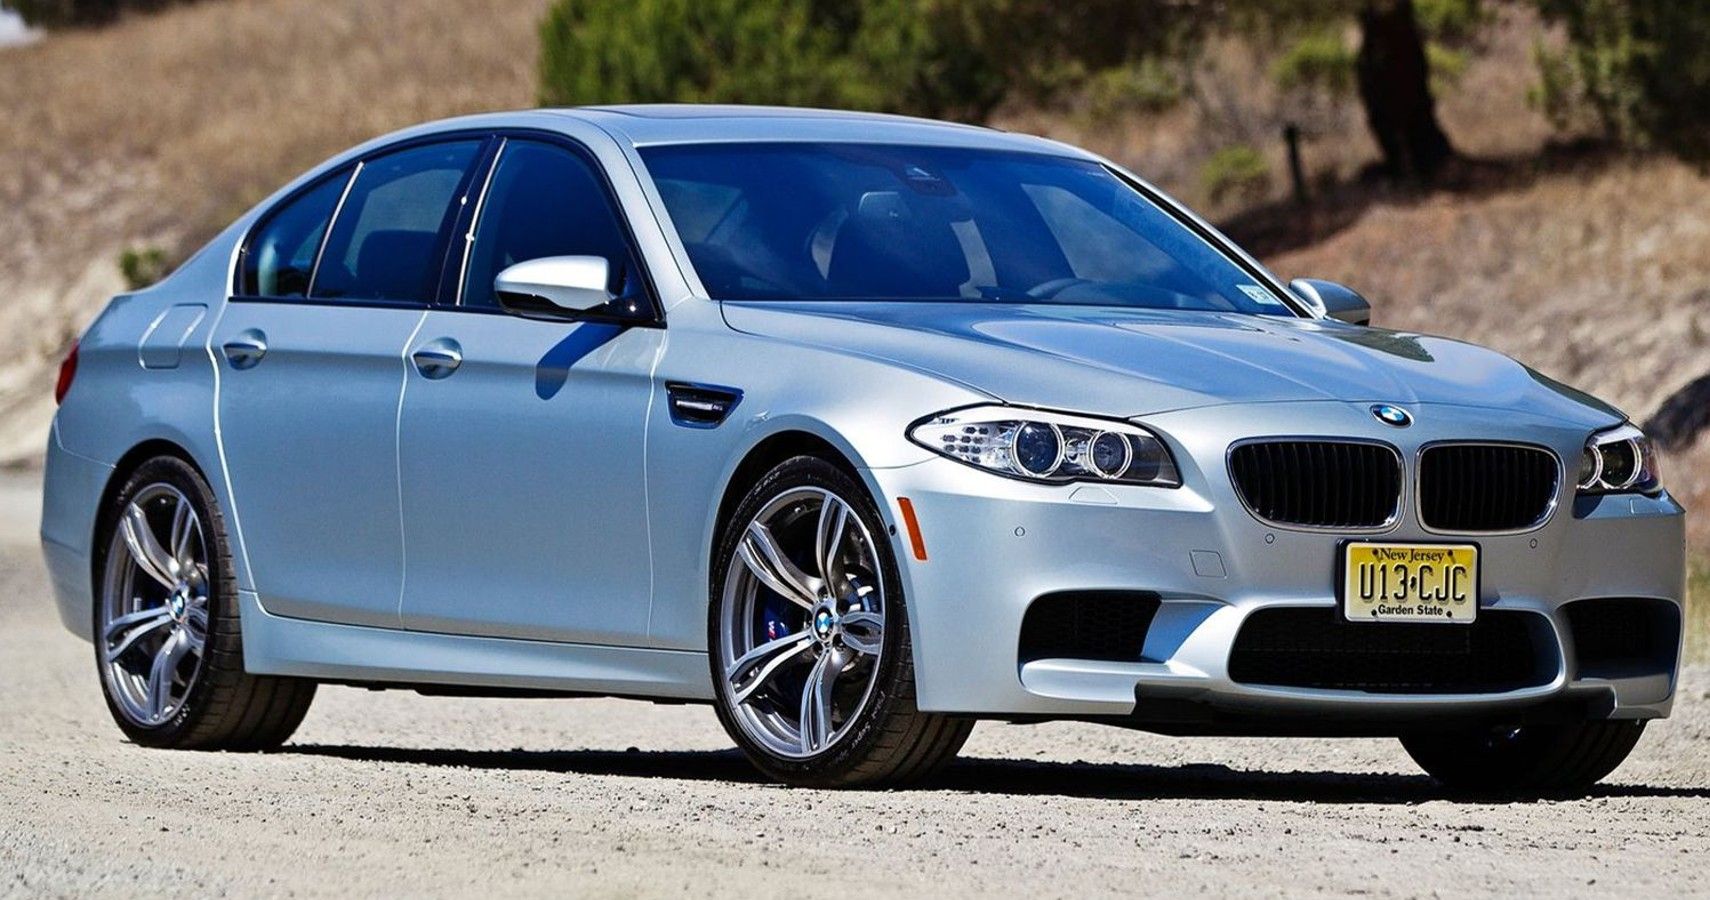 Silver 2013 BMW M5 on the road